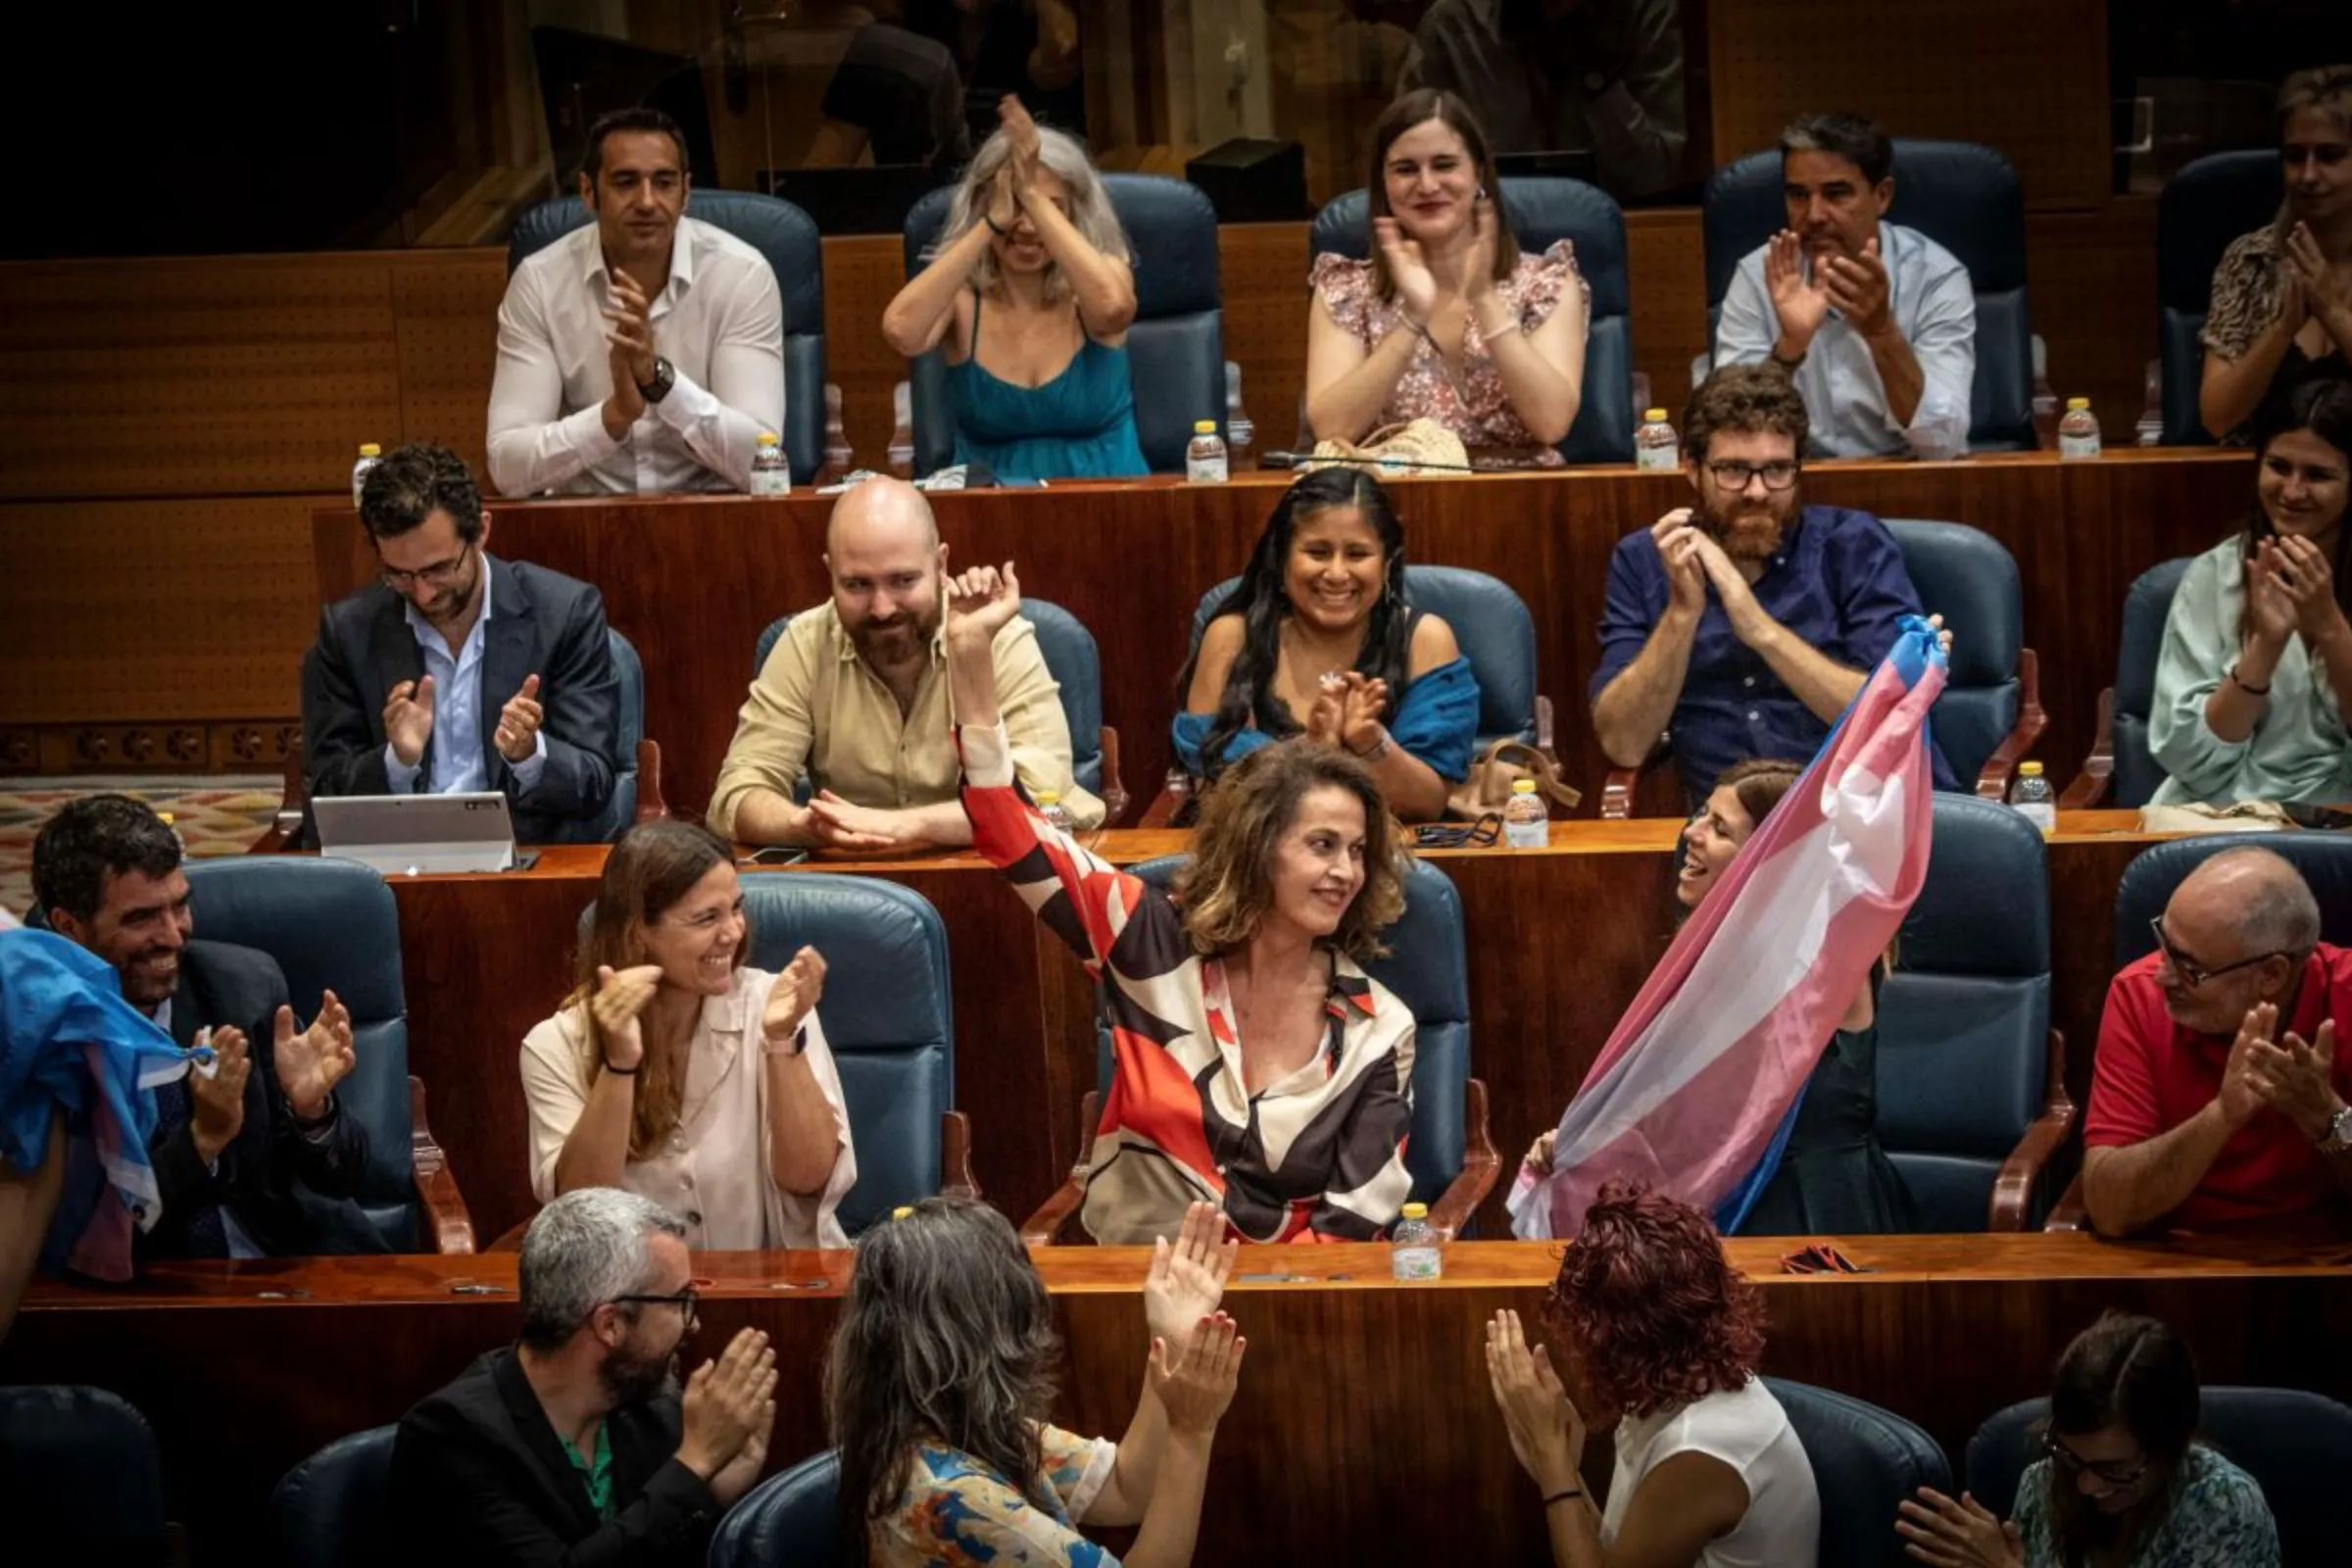 Spanish politician Carla Antonelli makes history as Spain’s first openly trans lawmaker. Bruno Thevenin/Handout via Thomson Reuters Foundation